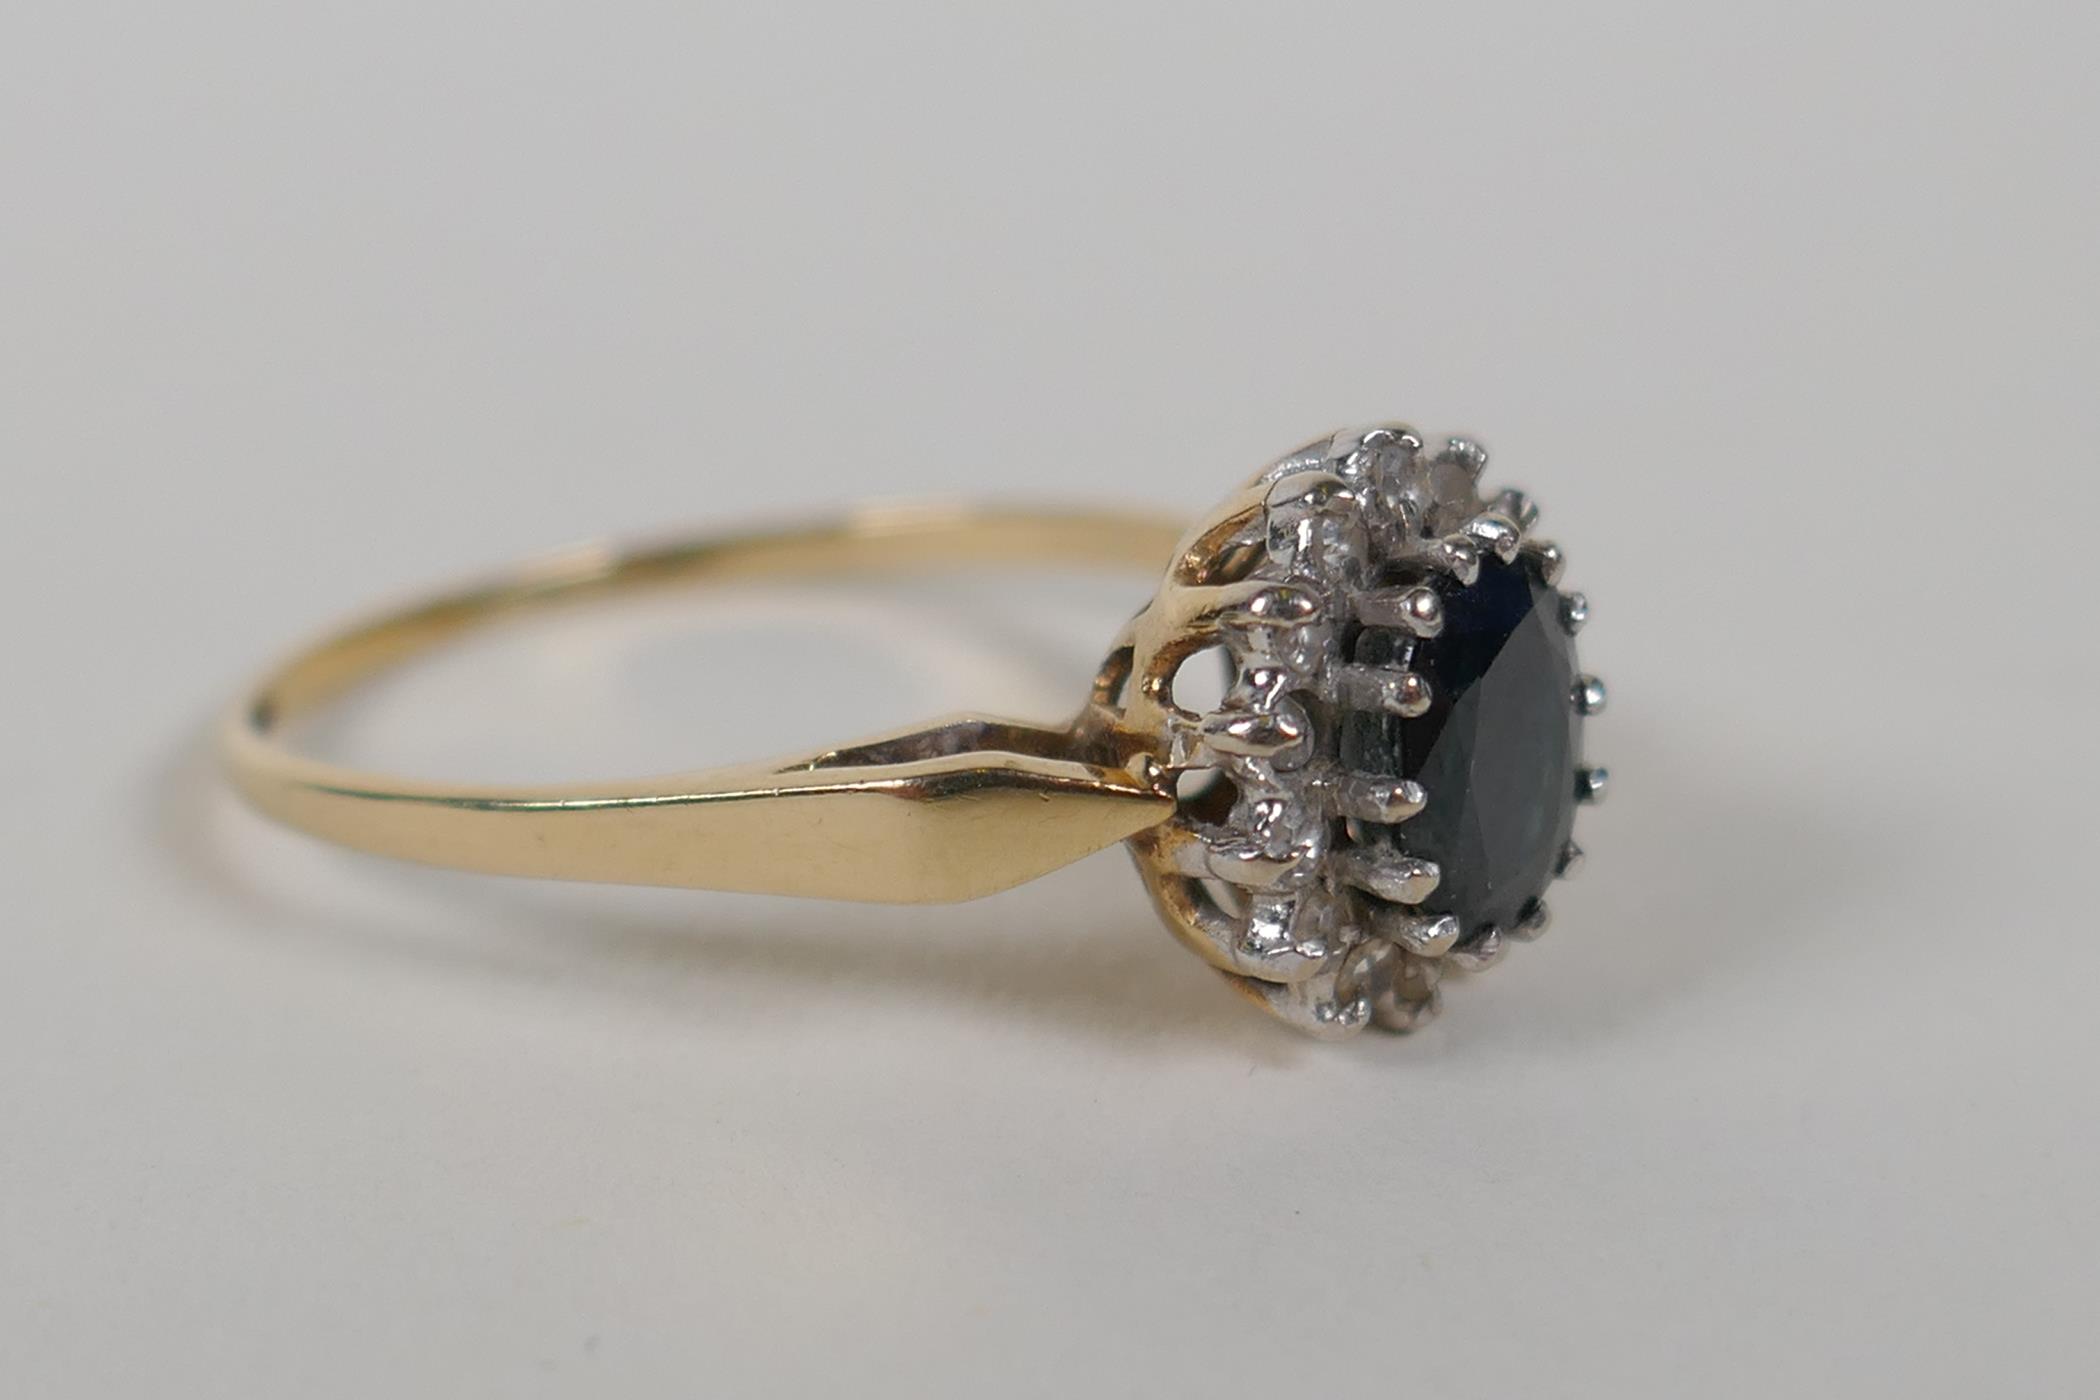 A 9ct yellow gold ring set with a blue stone encircled by diamonds, size Q/R - Image 2 of 3